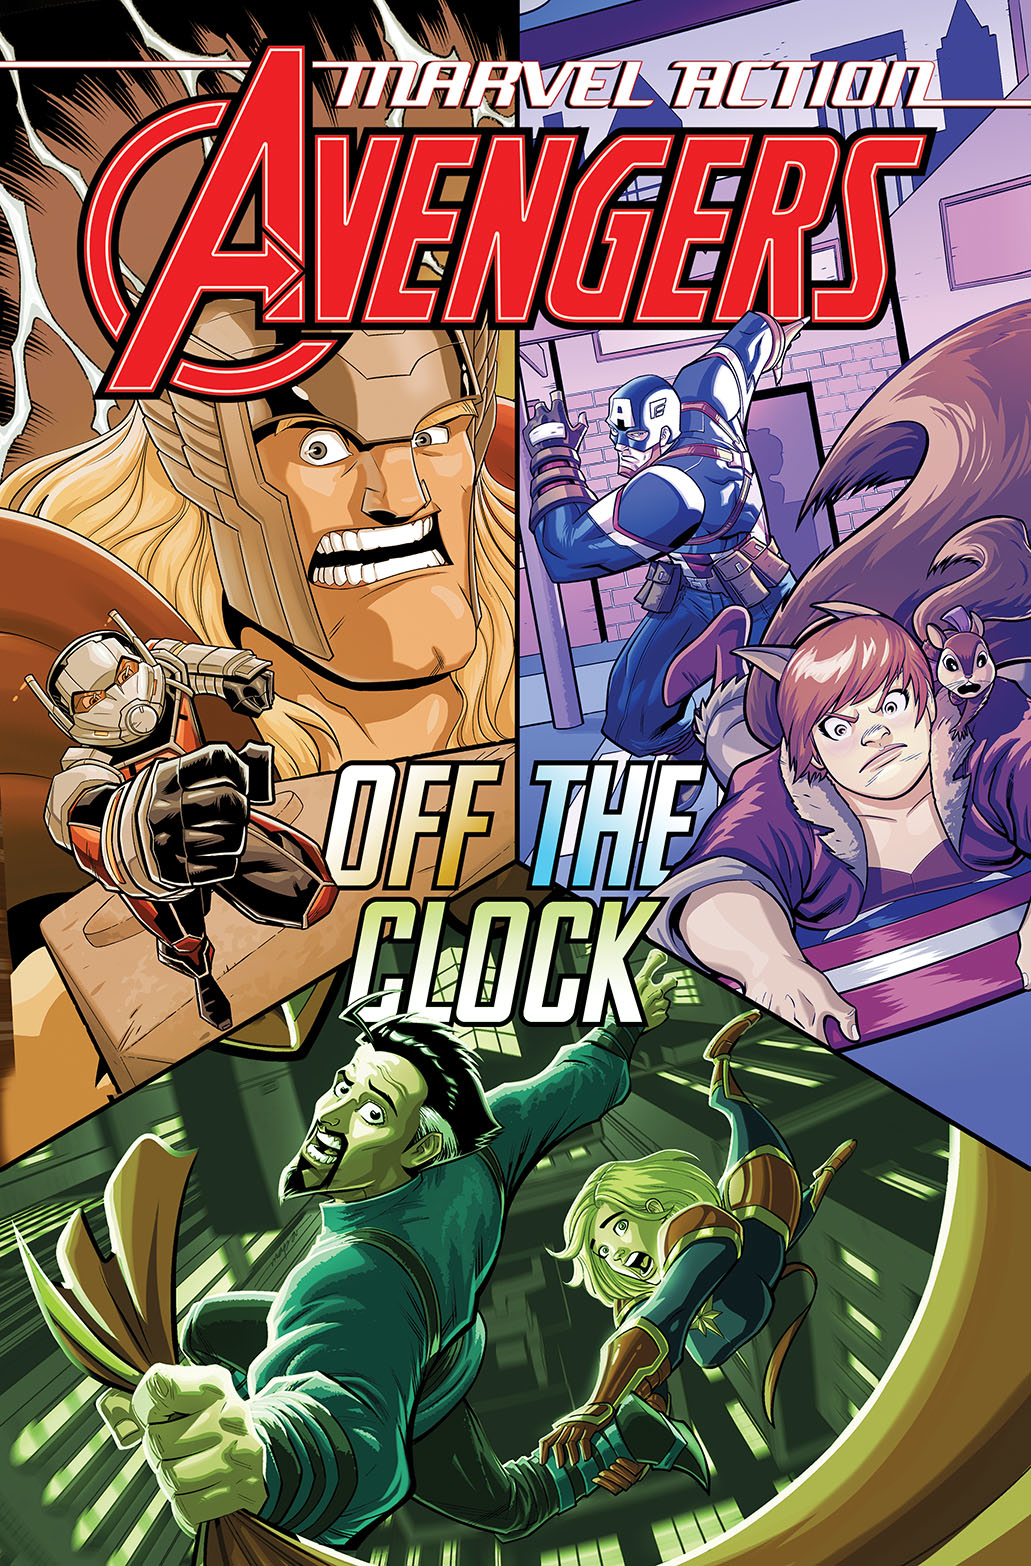 Marvel Action Avengers Graphic Novel Book 5 Off The Clock